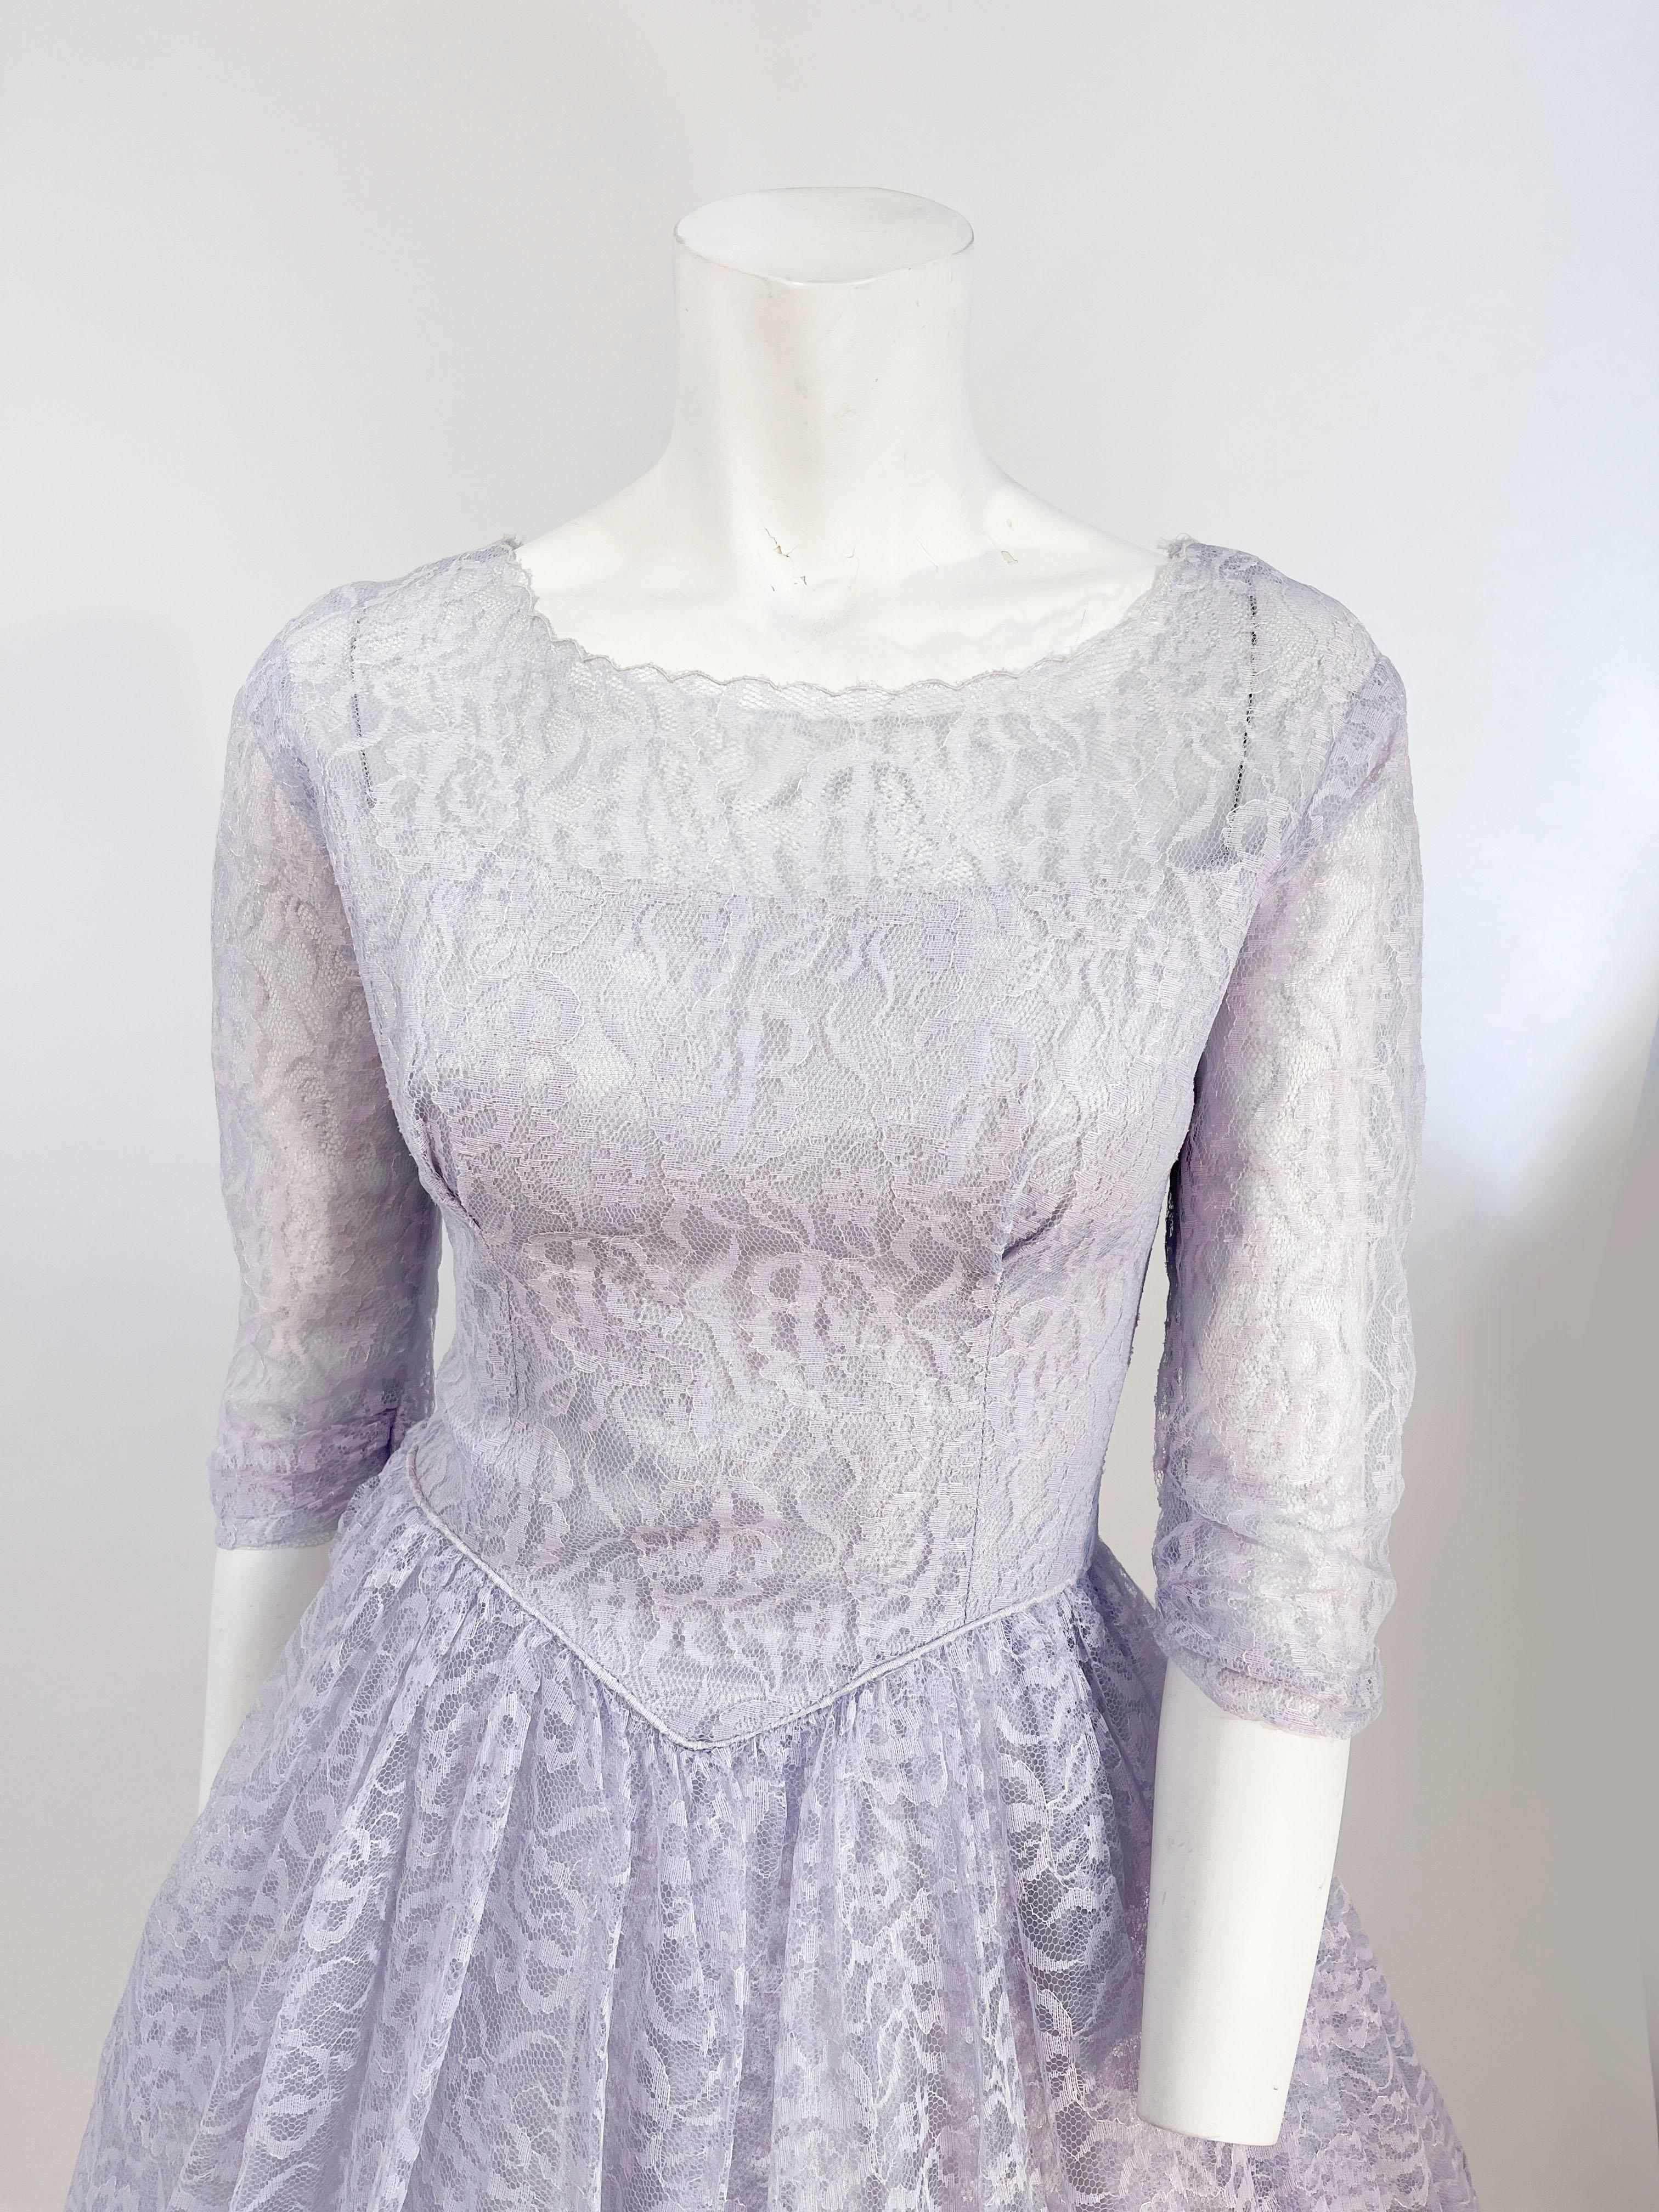 1950s Pewter/lavender floral lace party dress. The fitted bodice features a sheer boat neckline matching the sheer tree-quarter length gathered cuff sleeves and a pipped waistline getting a full t-length lace and tulle skirt. The back of the skirt